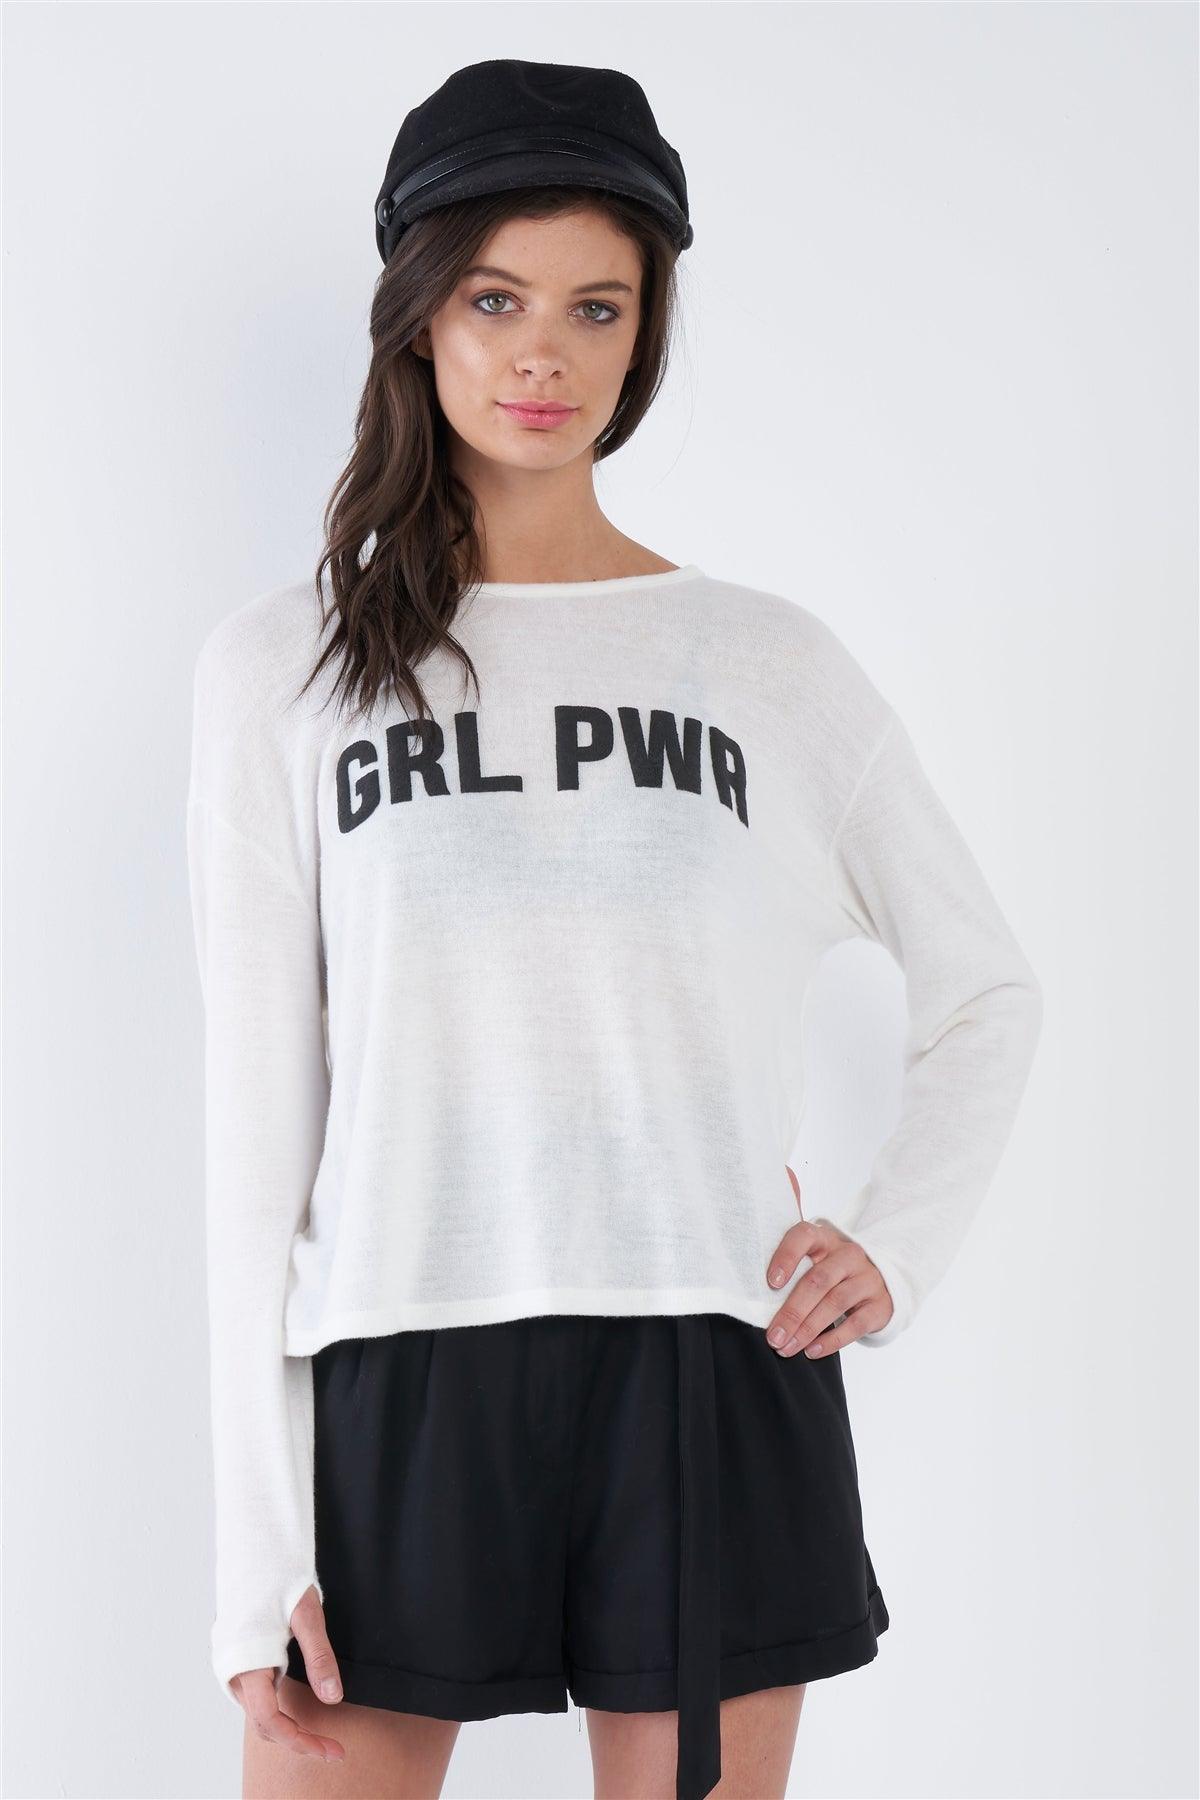 Off-White "GRL PWR" Long Sleeve Thumb Hole Top /3-2-1